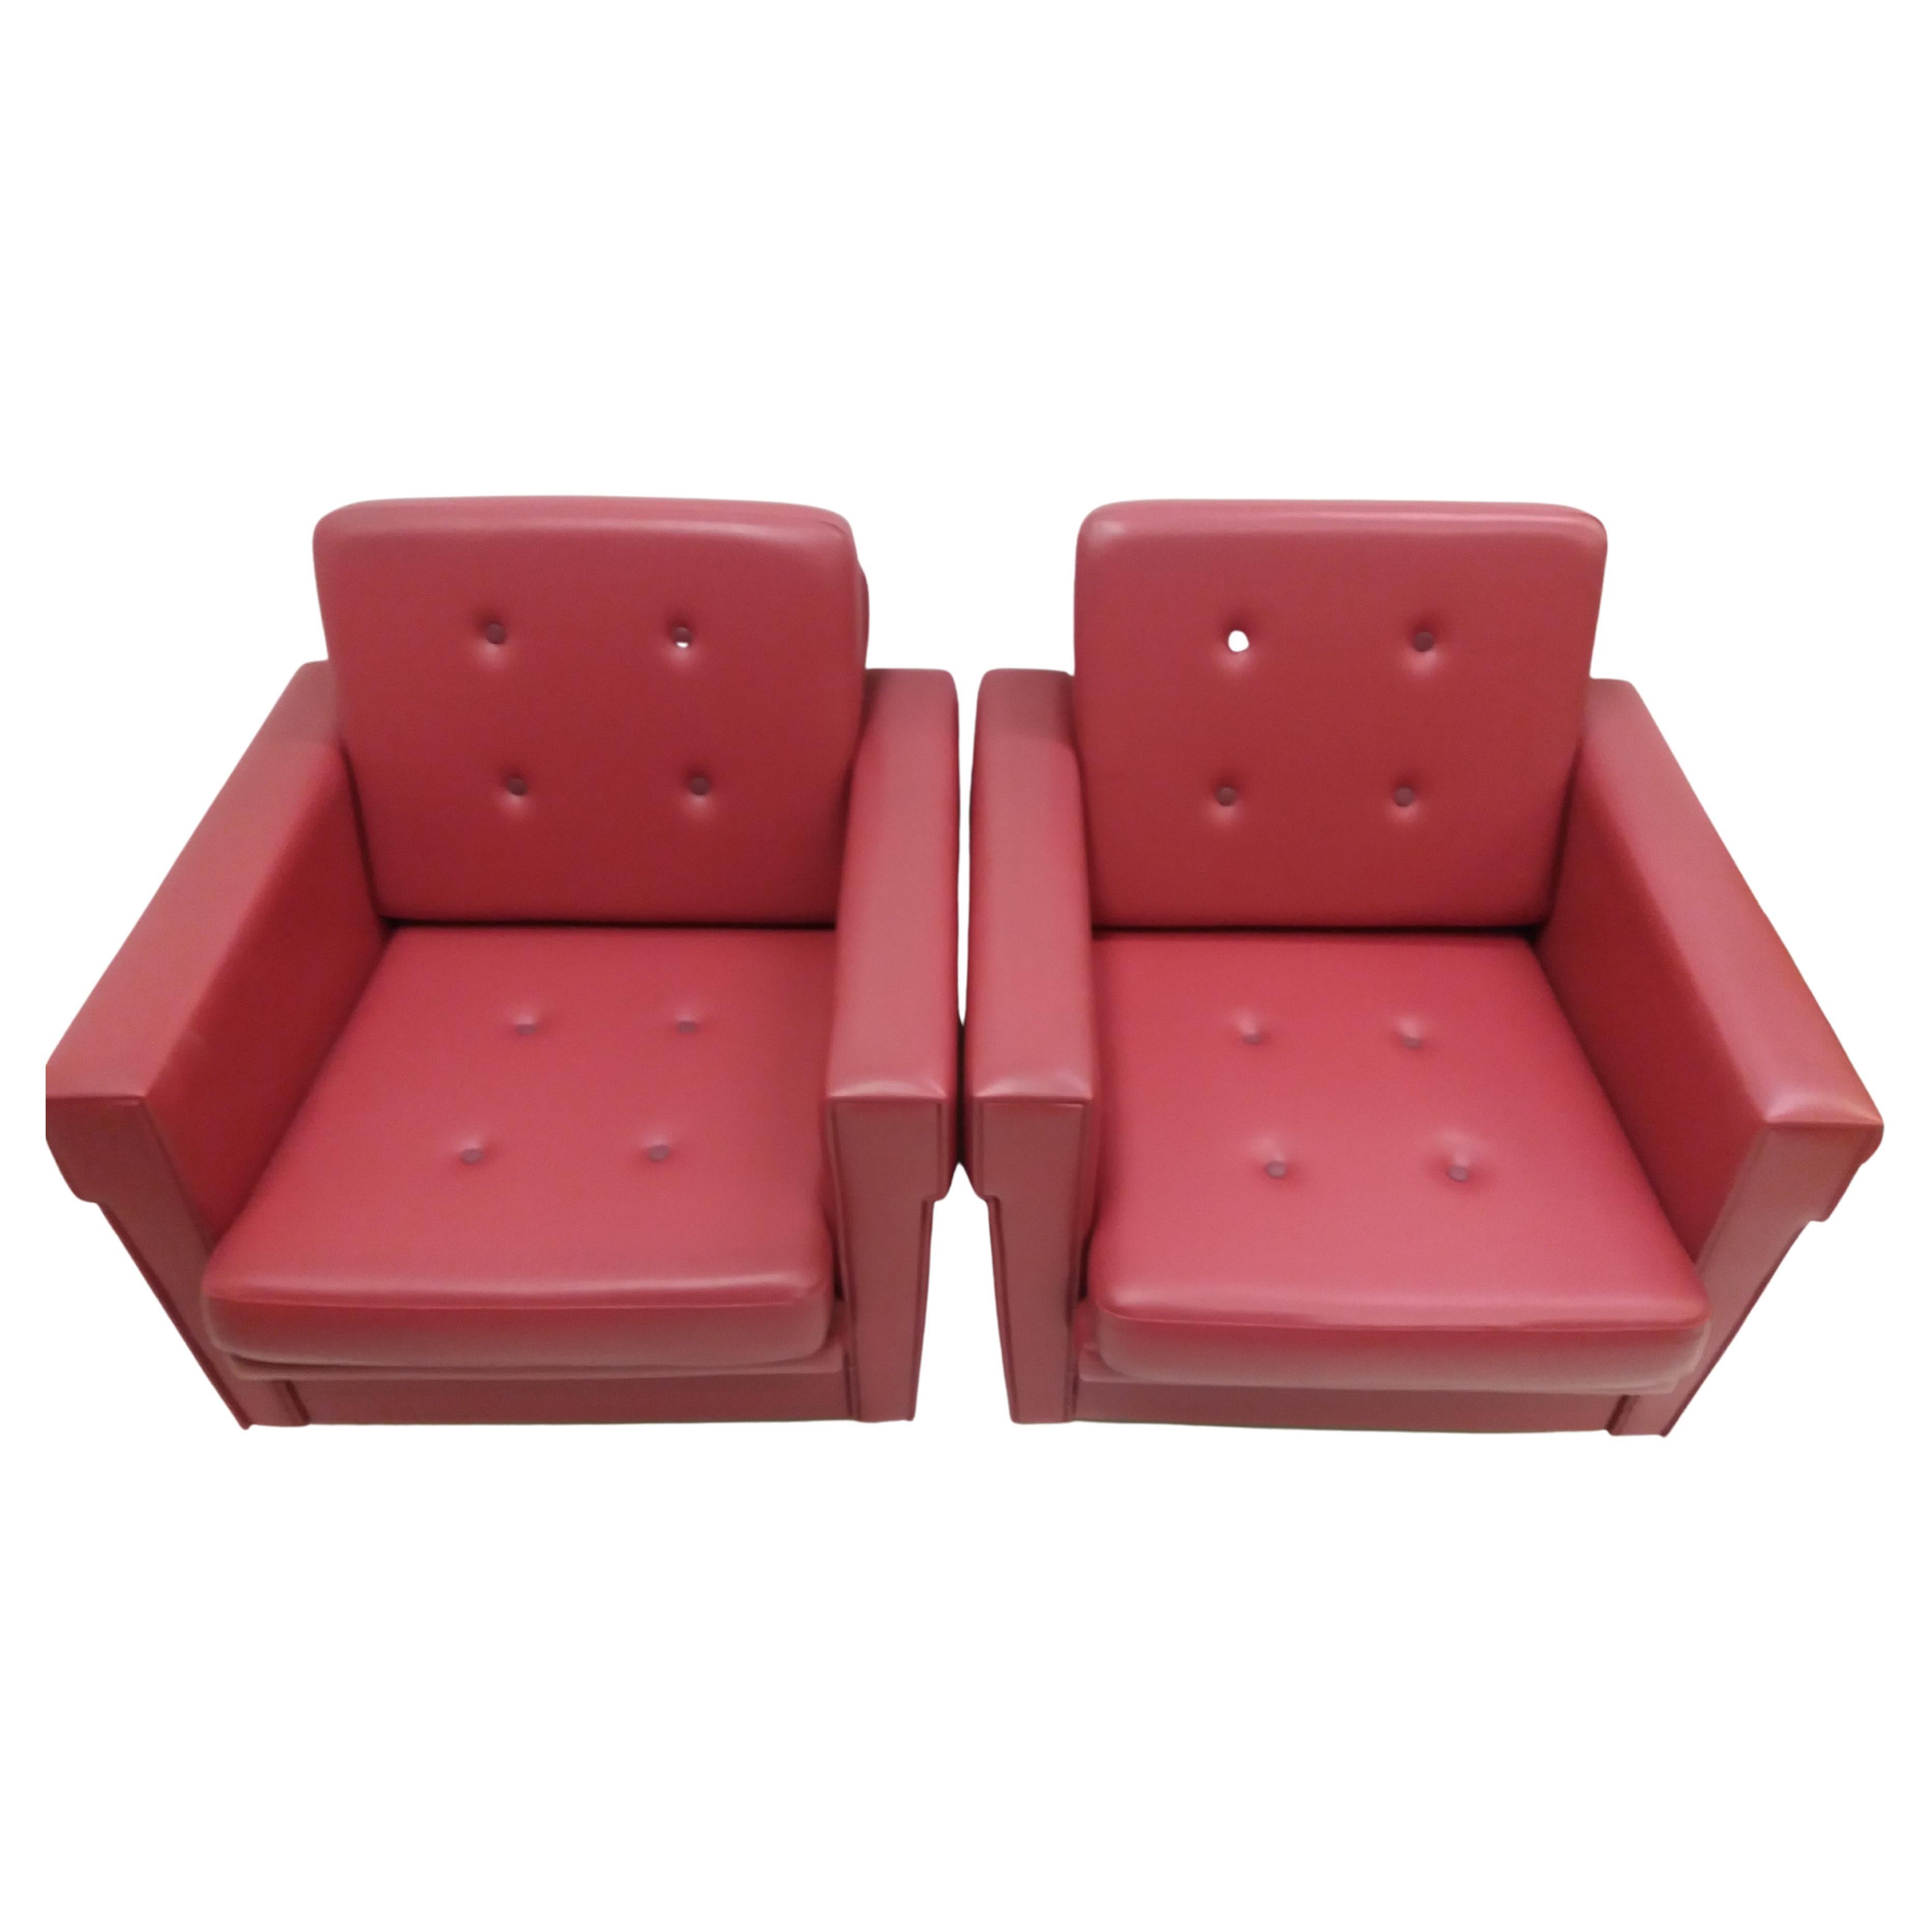 1970 Pair of Brussels Style Armchairs, Czechoslovakia